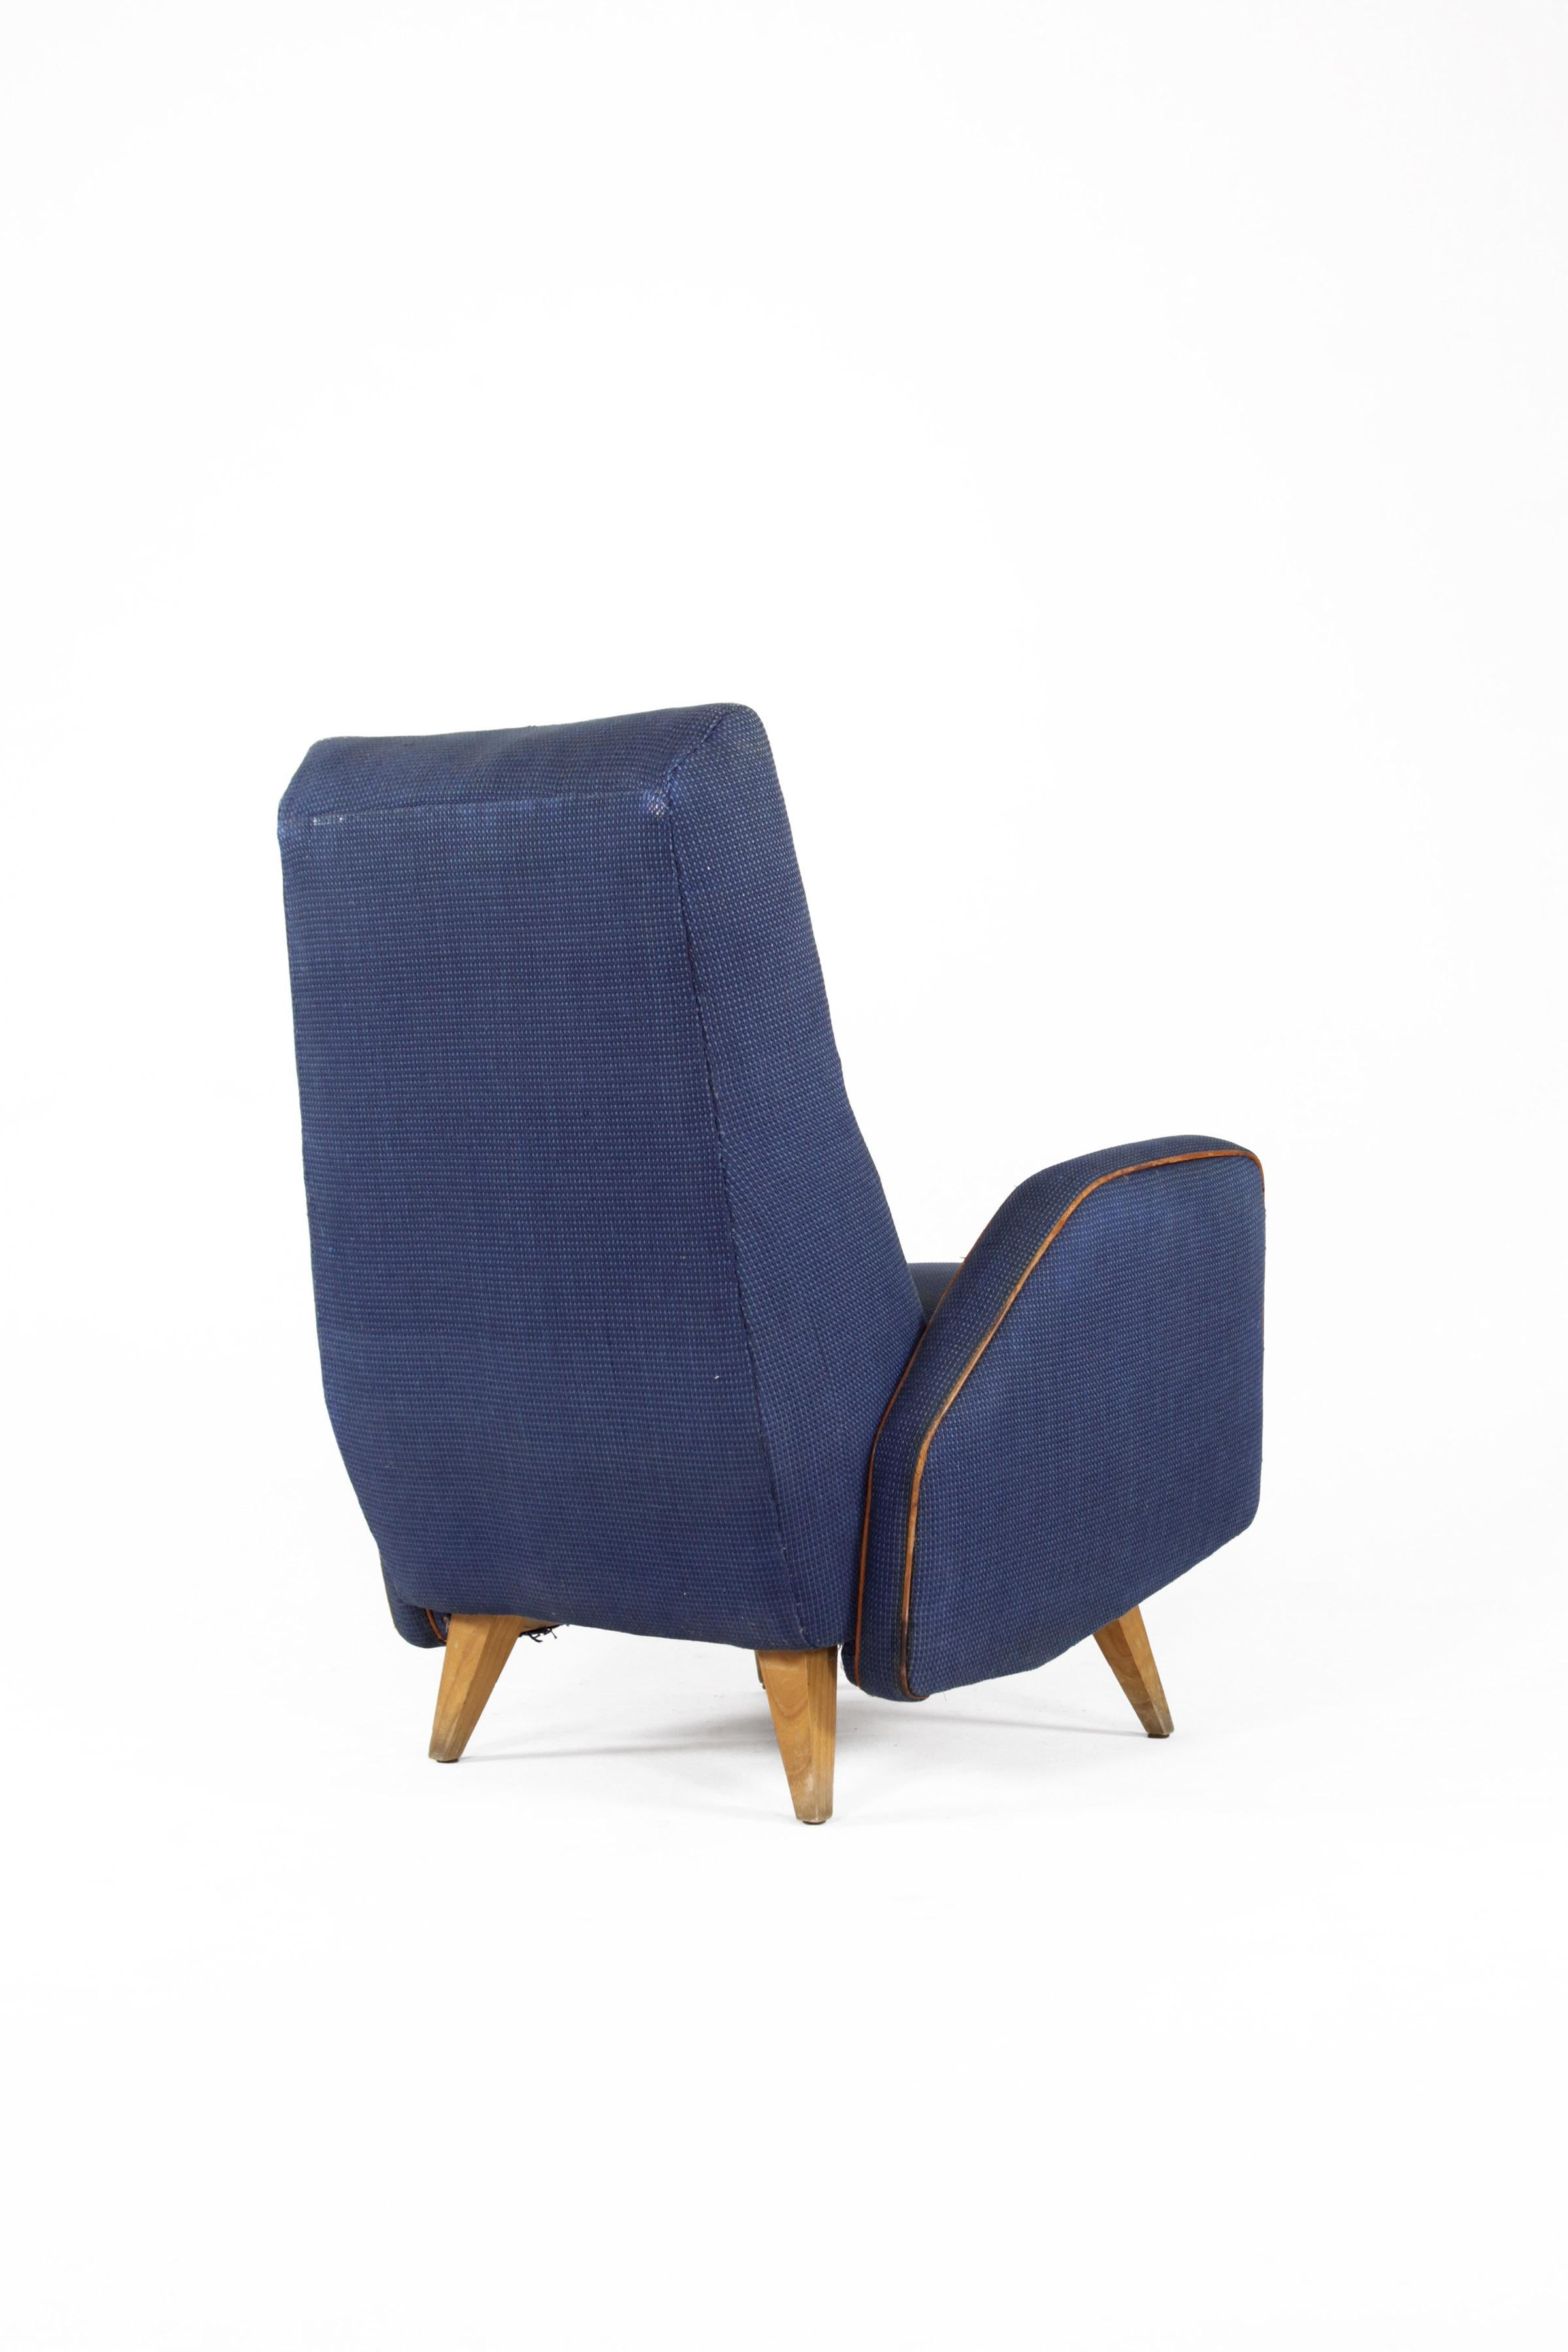 Mid-Century Modern Armchair, Design by Nino Zoncada, Italy, 1950s For Sale